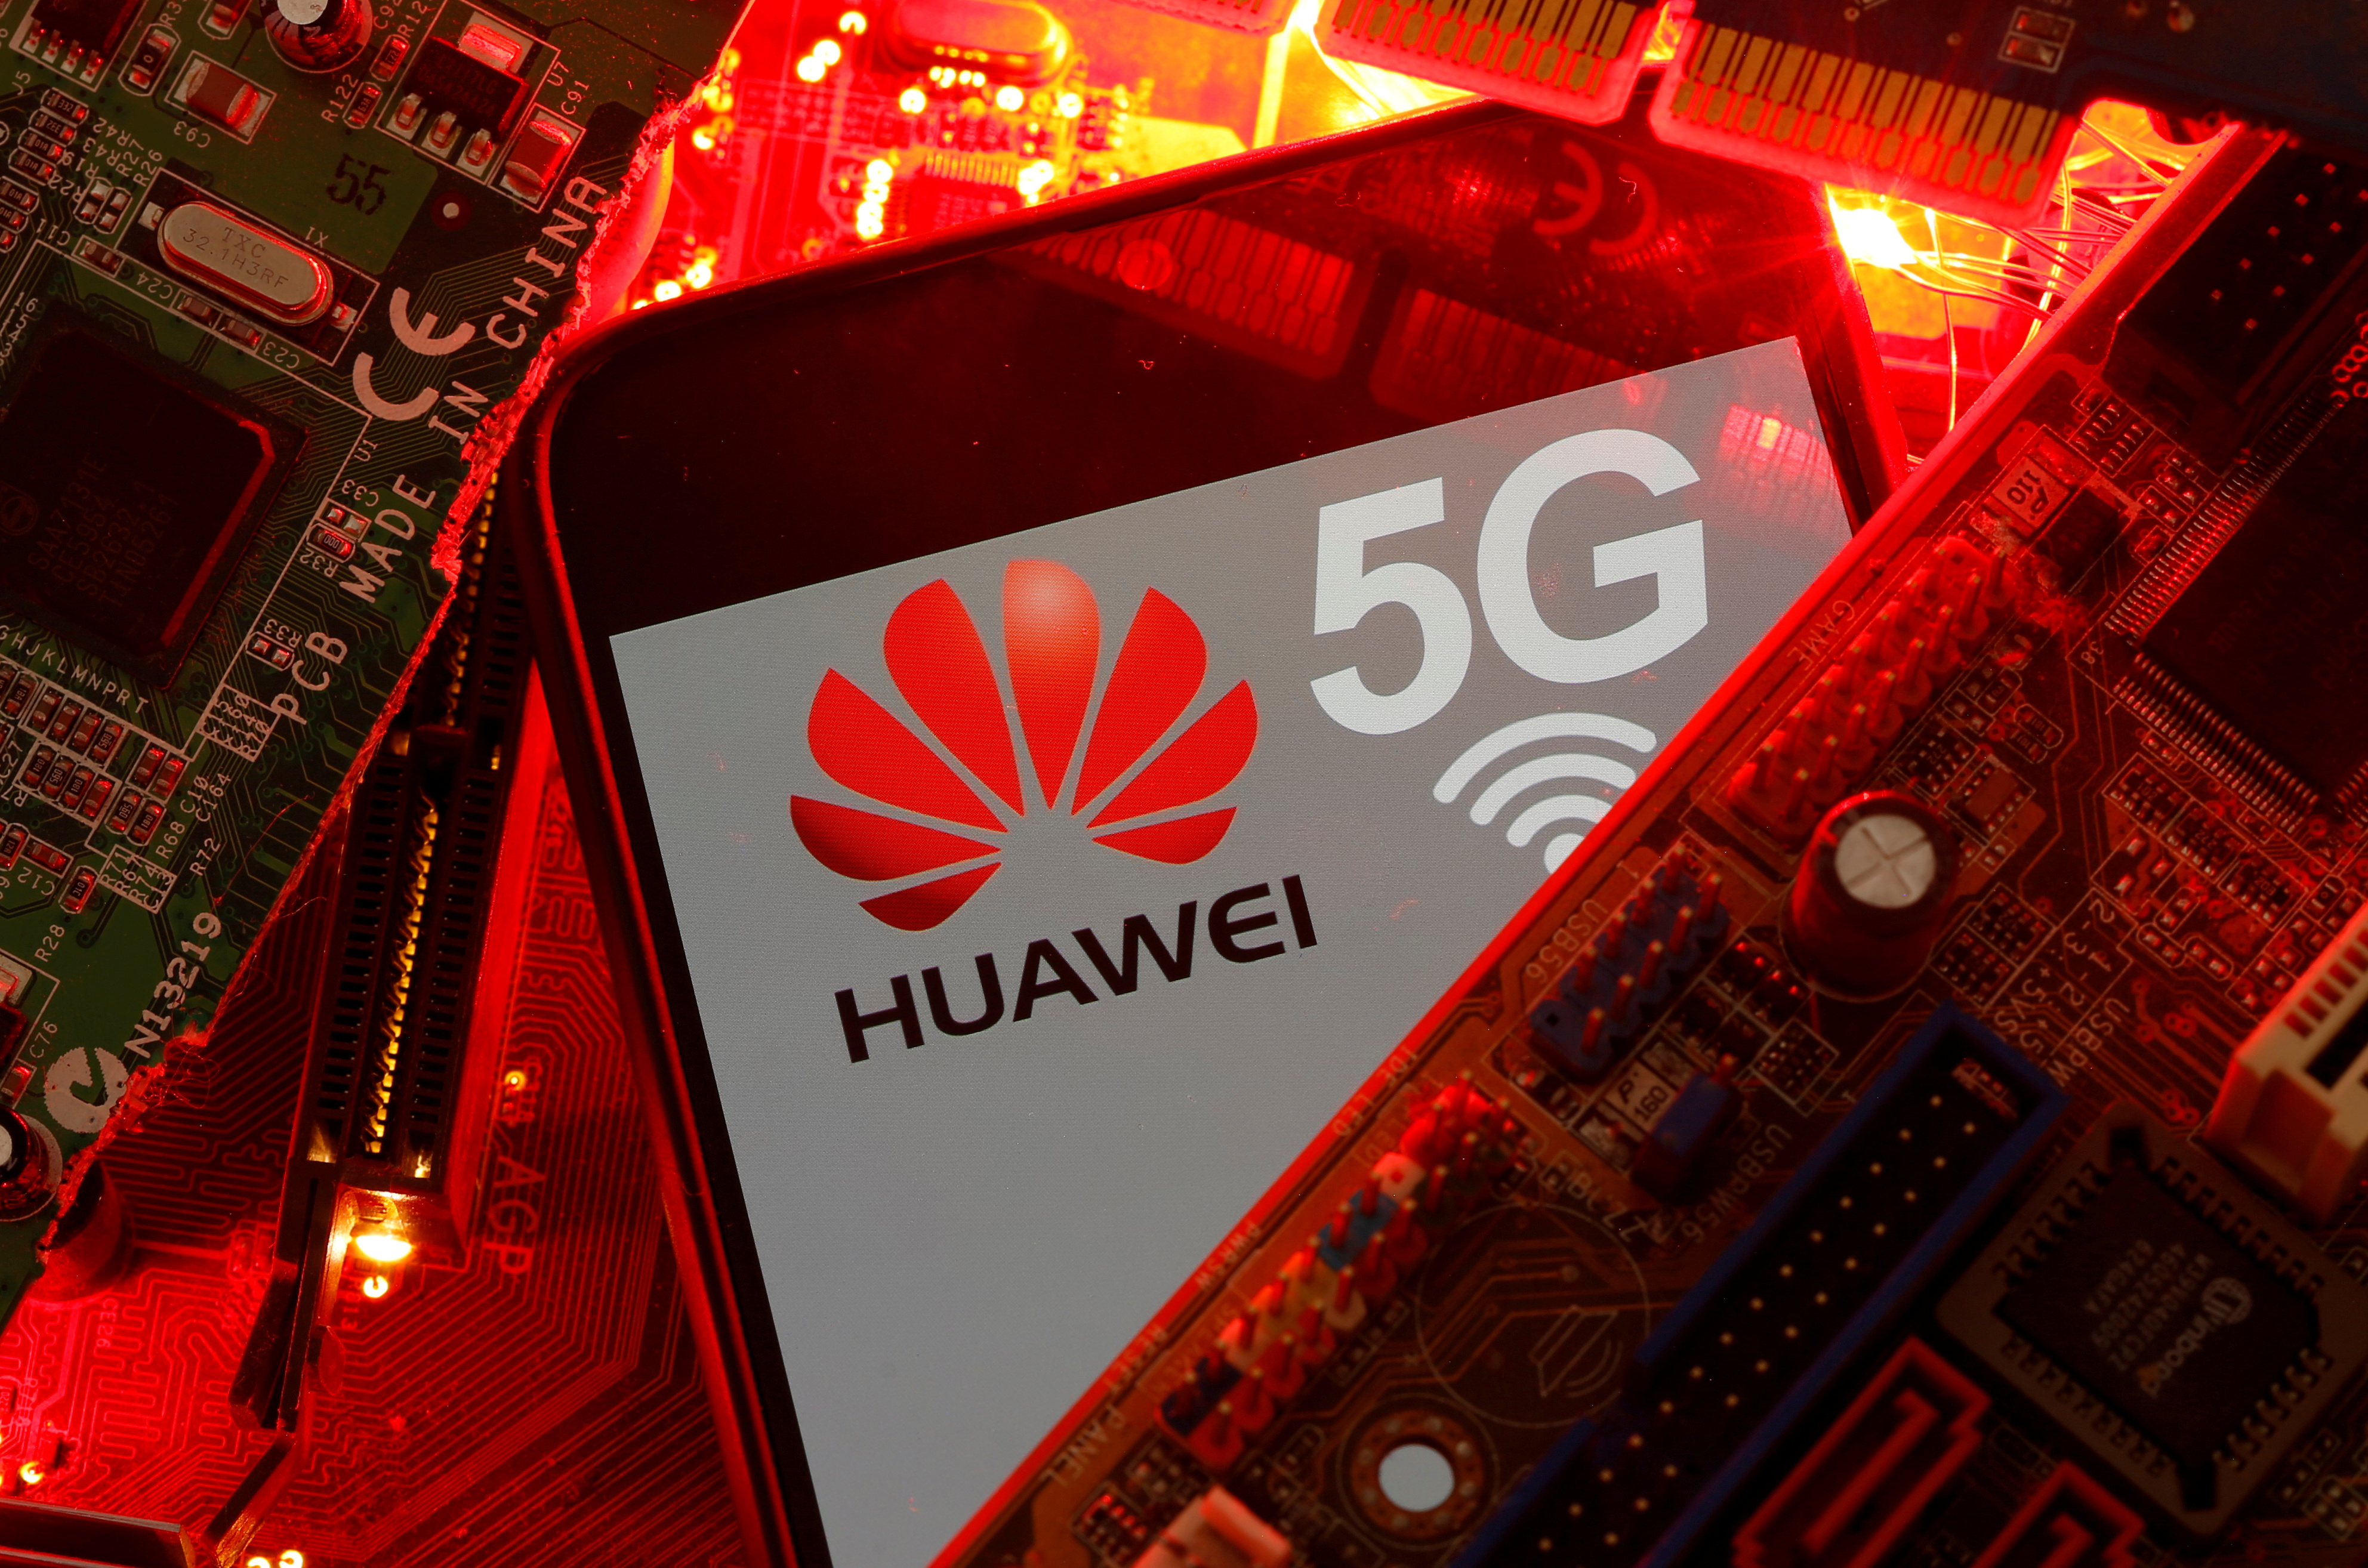 Sweden bans Huawei, ZTE from upcoming 5G networks